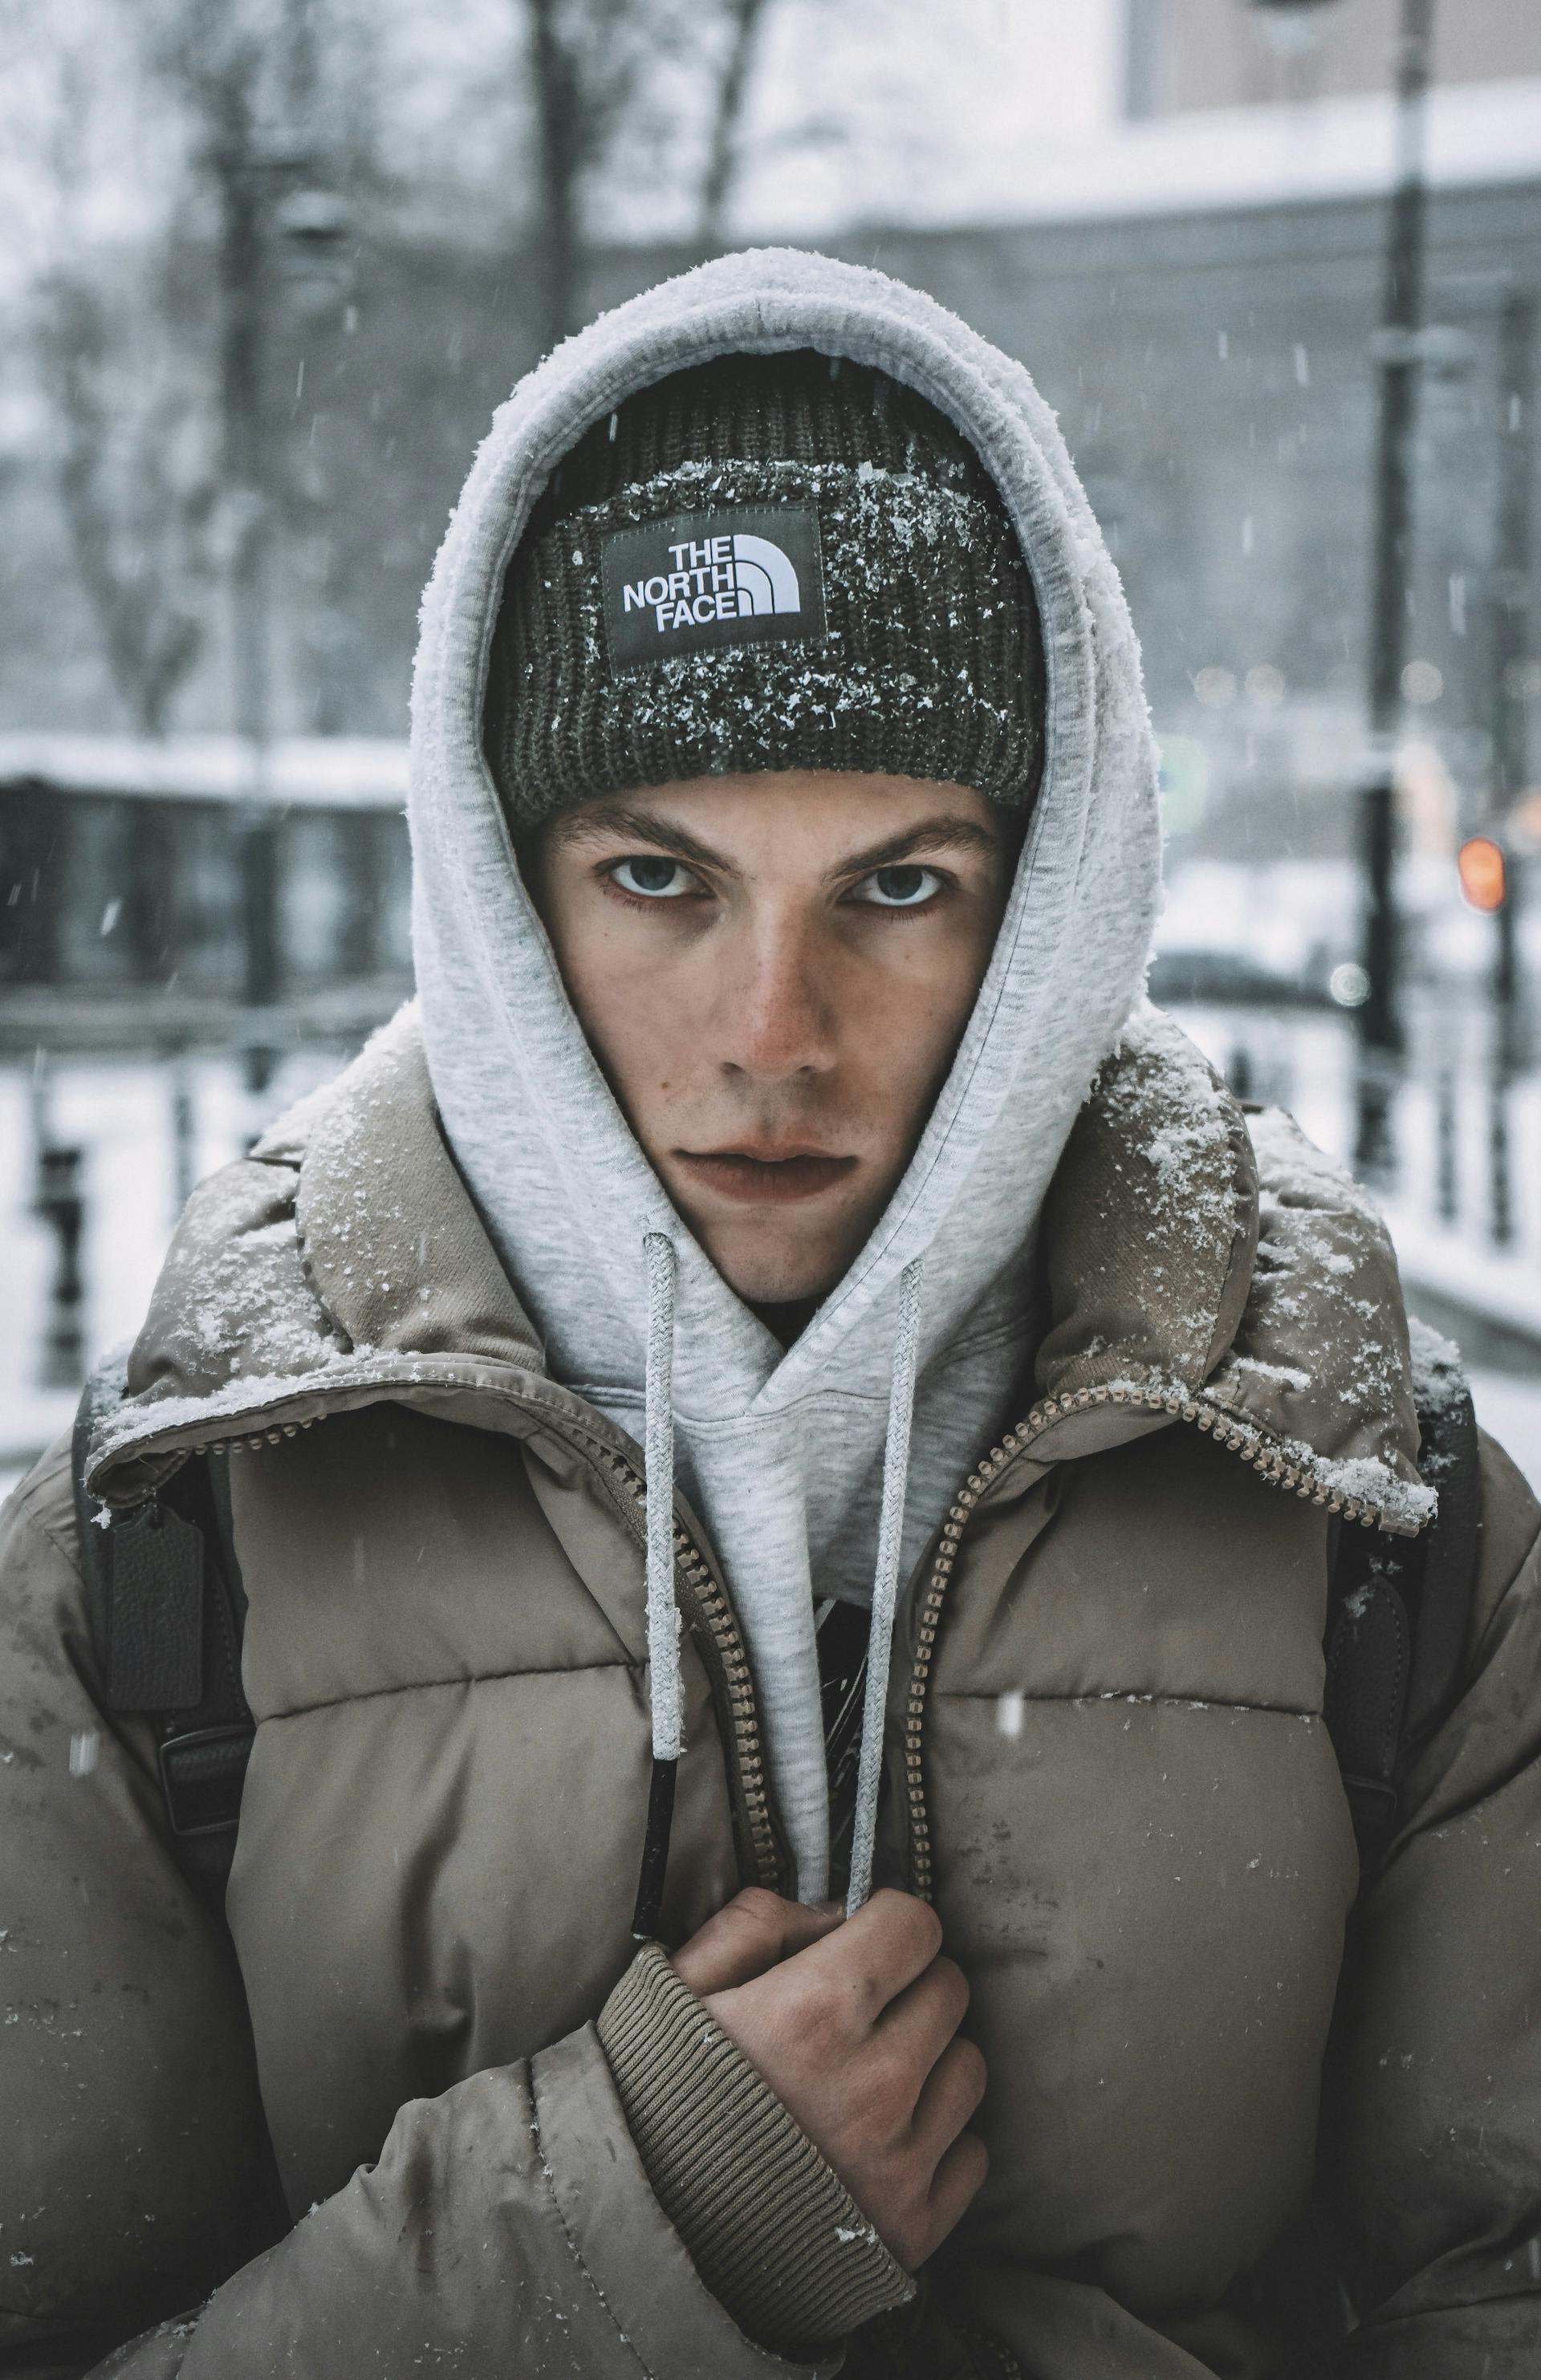 Man wearing North Face branded clothing in the snow being a brand ambassador